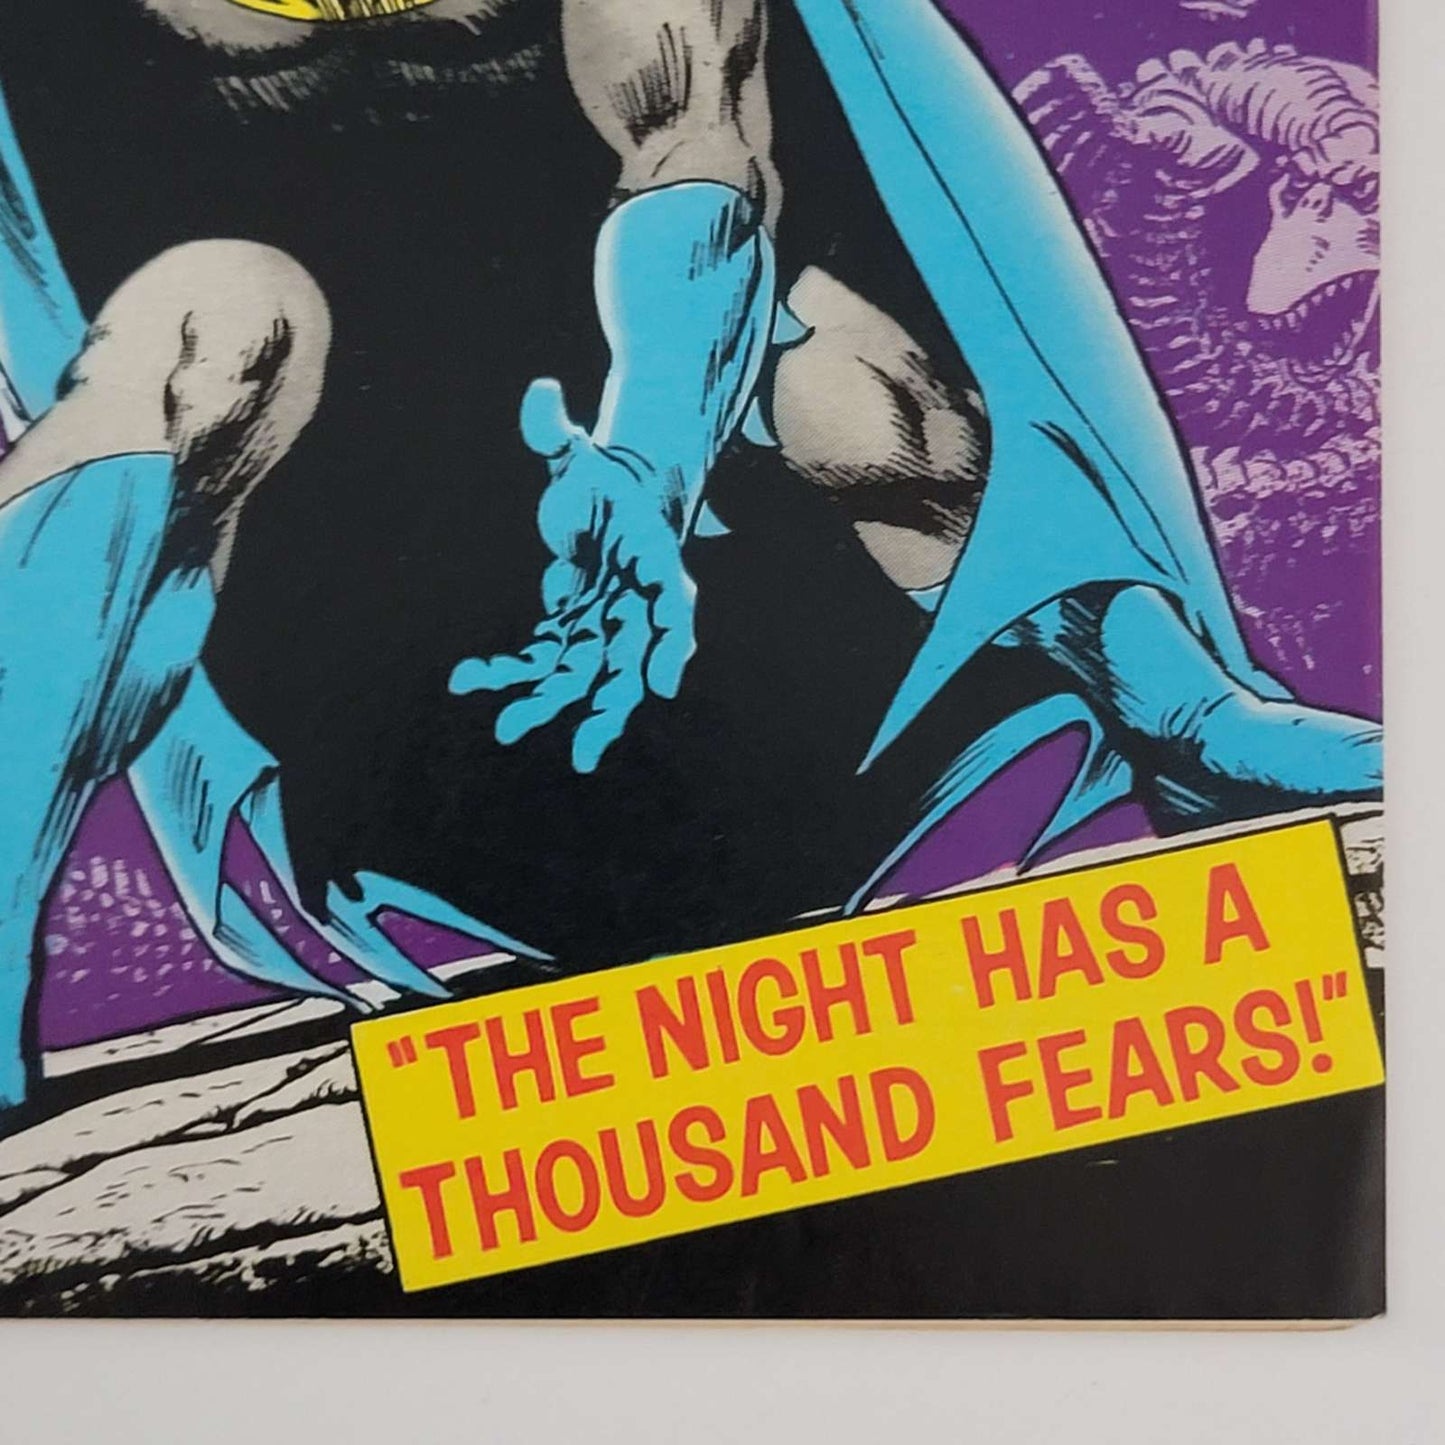 Detective Comics Vol 1 #0436 - The Night Has a Thousand Fears